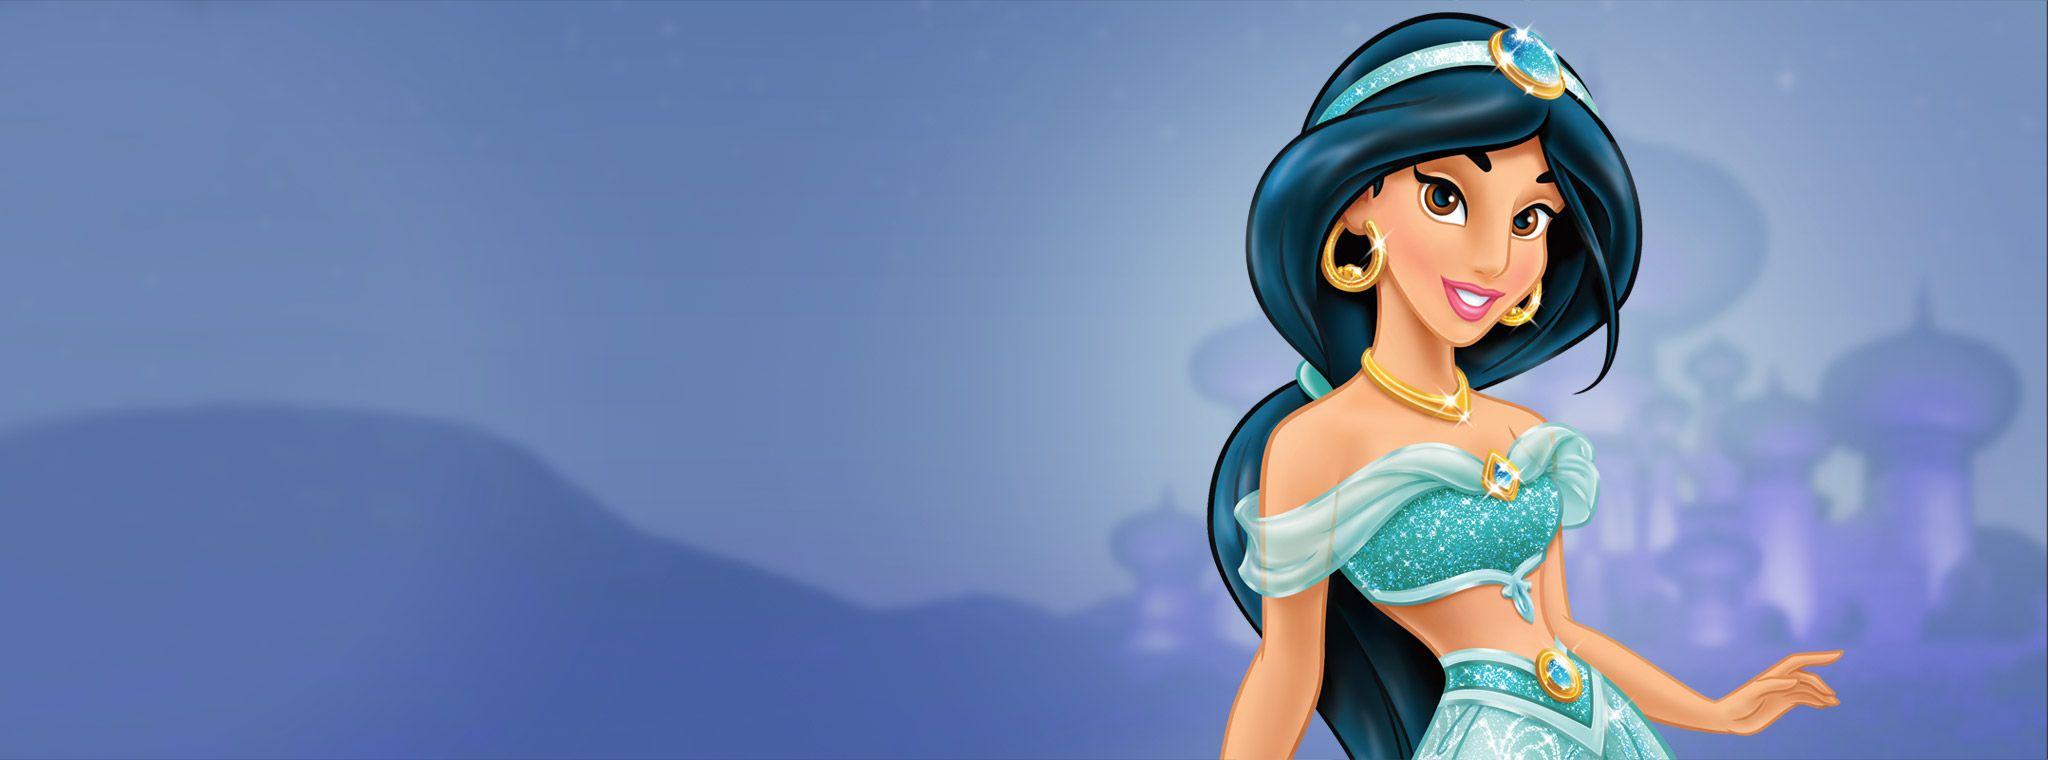 50 Princess Jasmine HD Wallpapers and Backgrounds